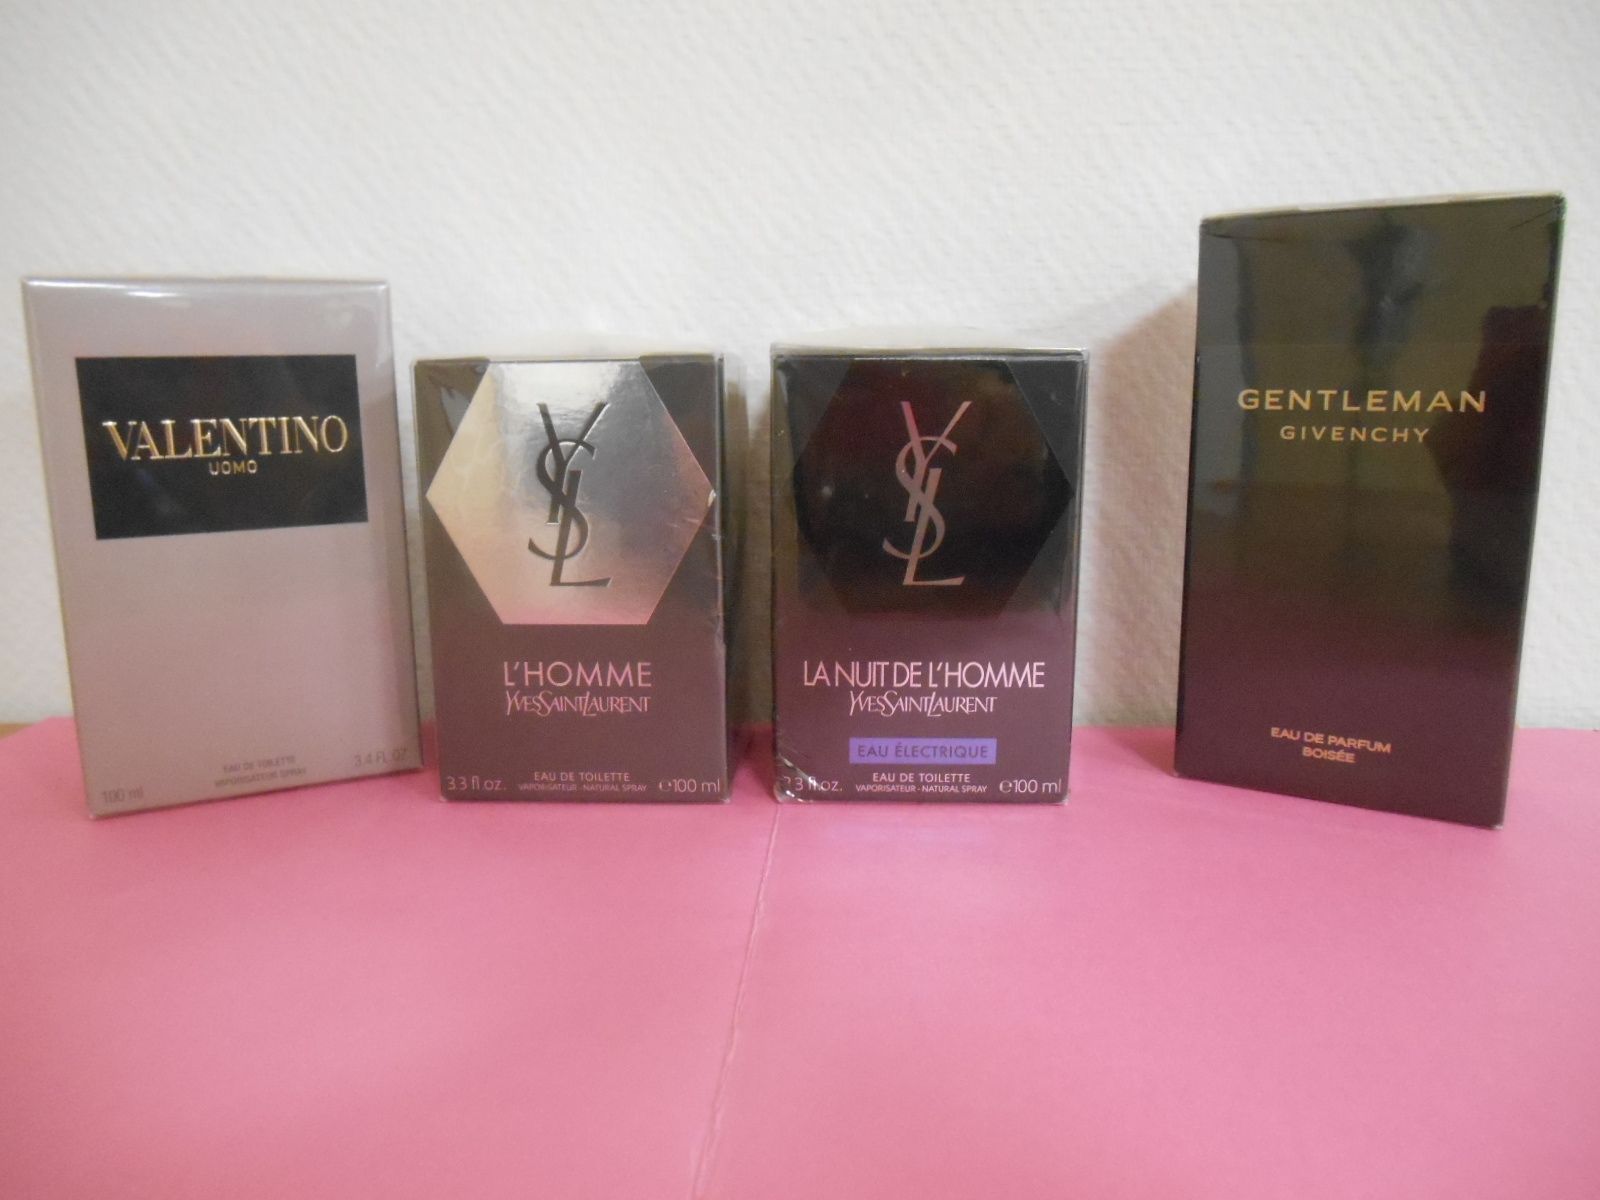 Null 4 men's perfumes, new condition, in blister pack :
- VALENTINO. Uomo. Eau d&hellip;